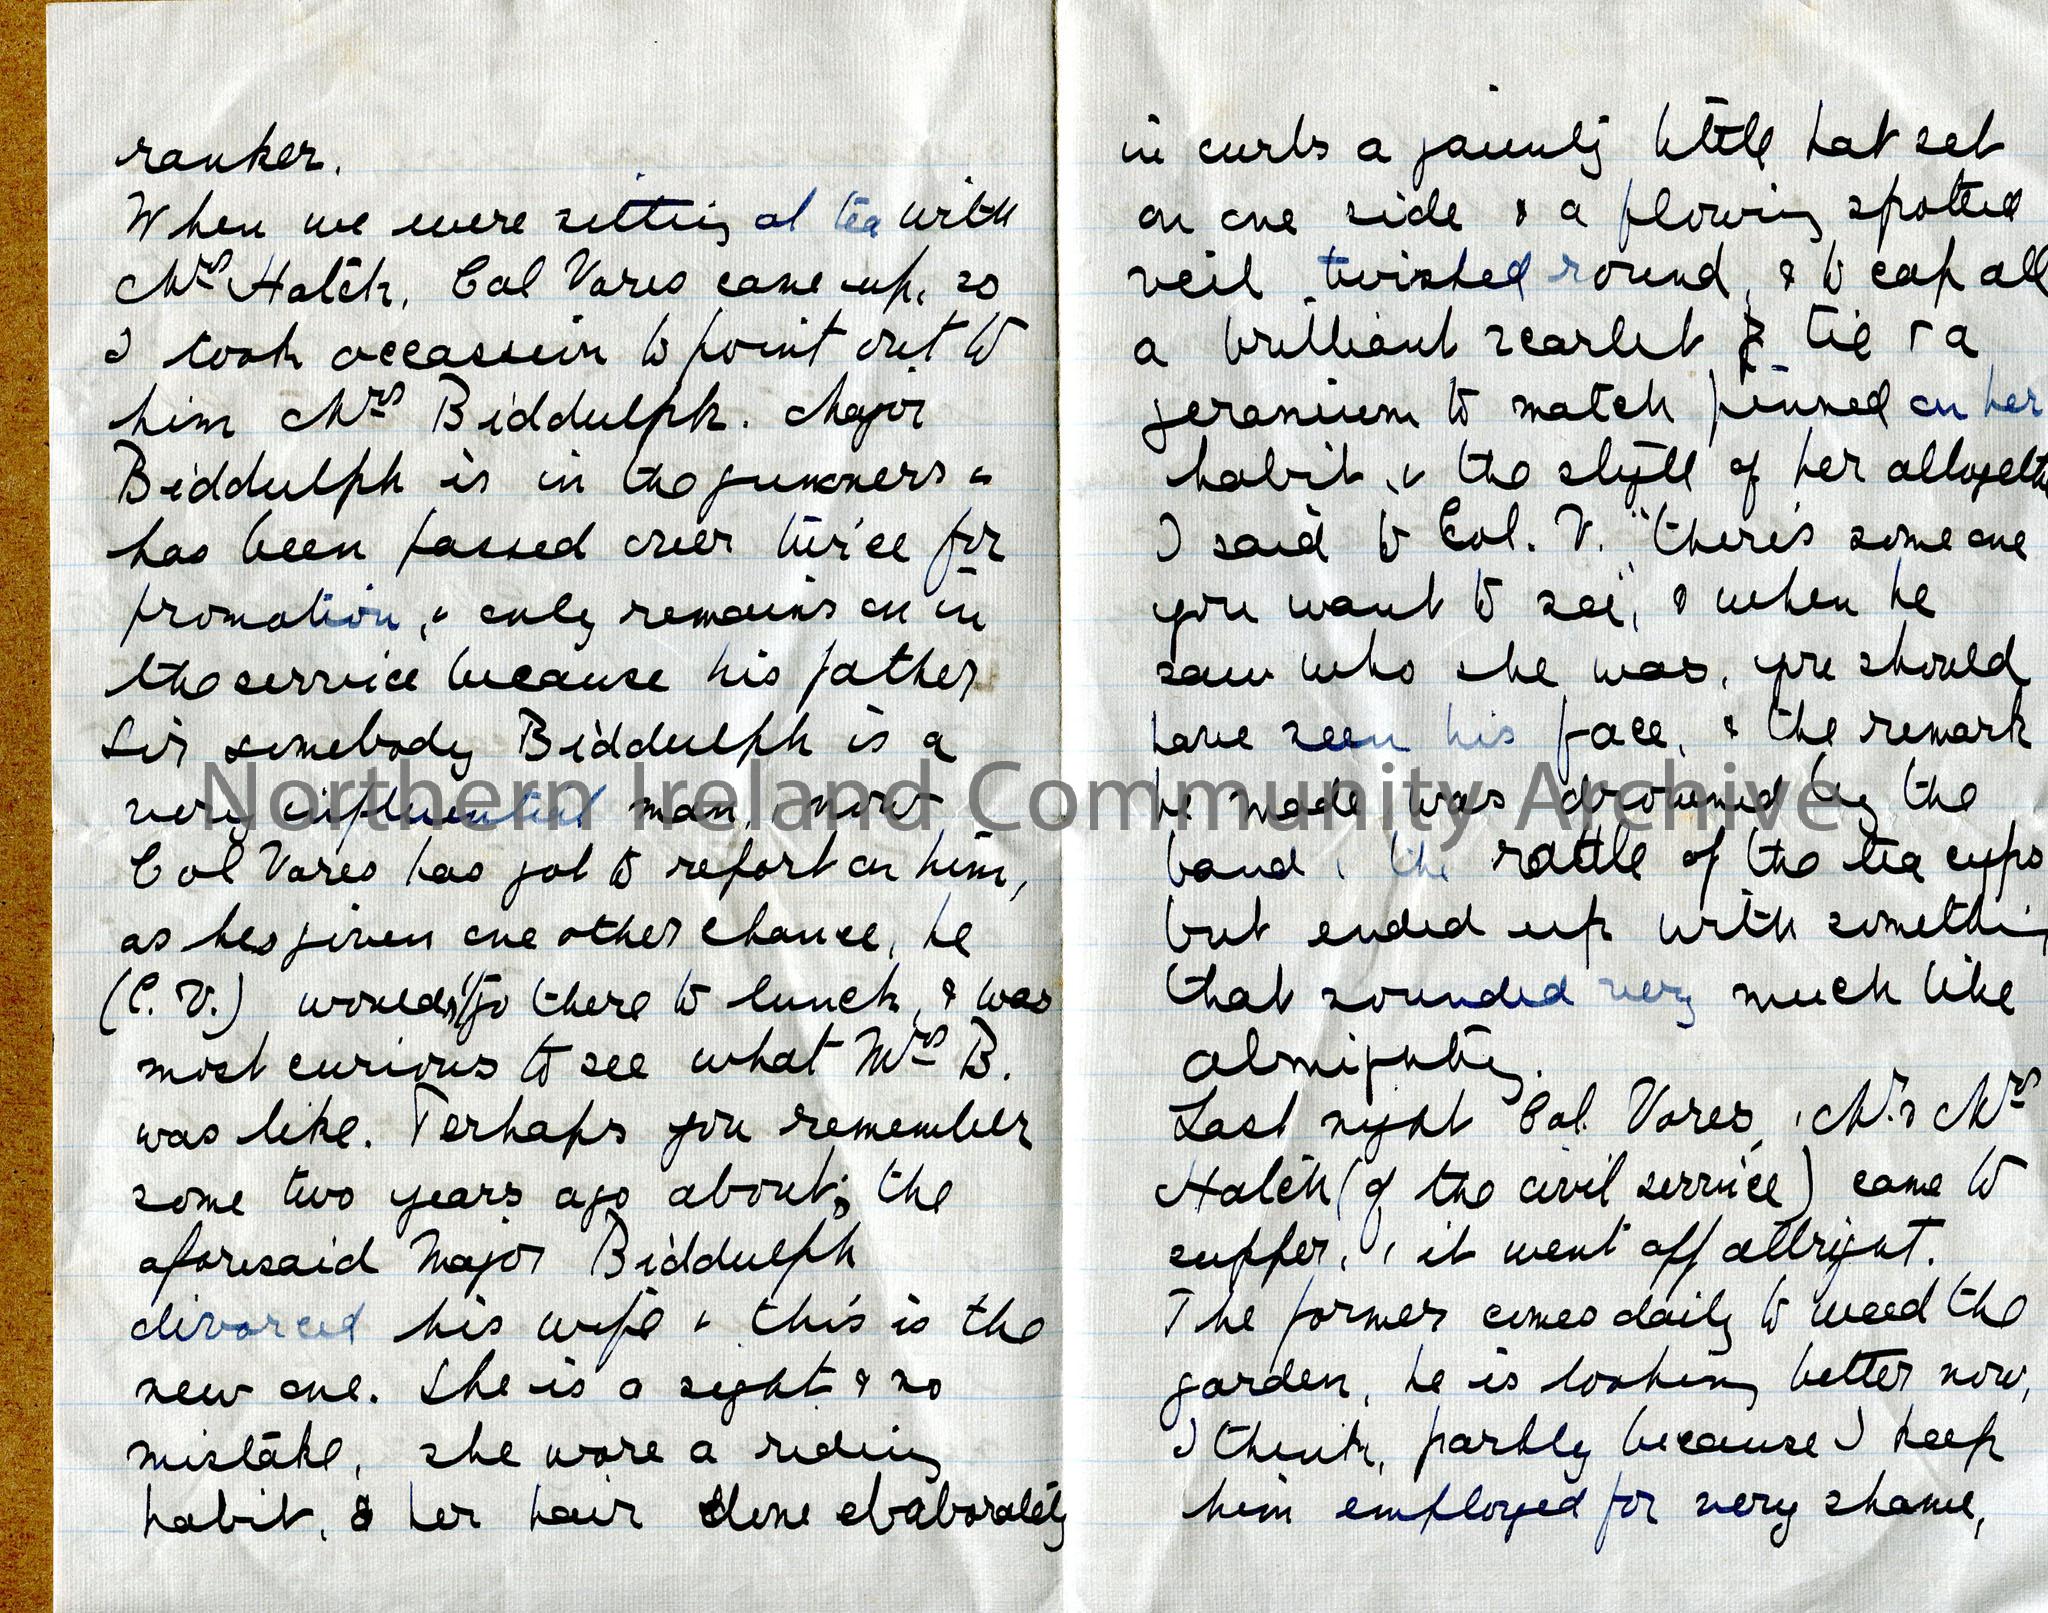 One of 2 double pages of handwritten letter. Comments on Dutch dress style. Regular horse rides in the mornings. Describes gymkhana event and a Major … – img035a